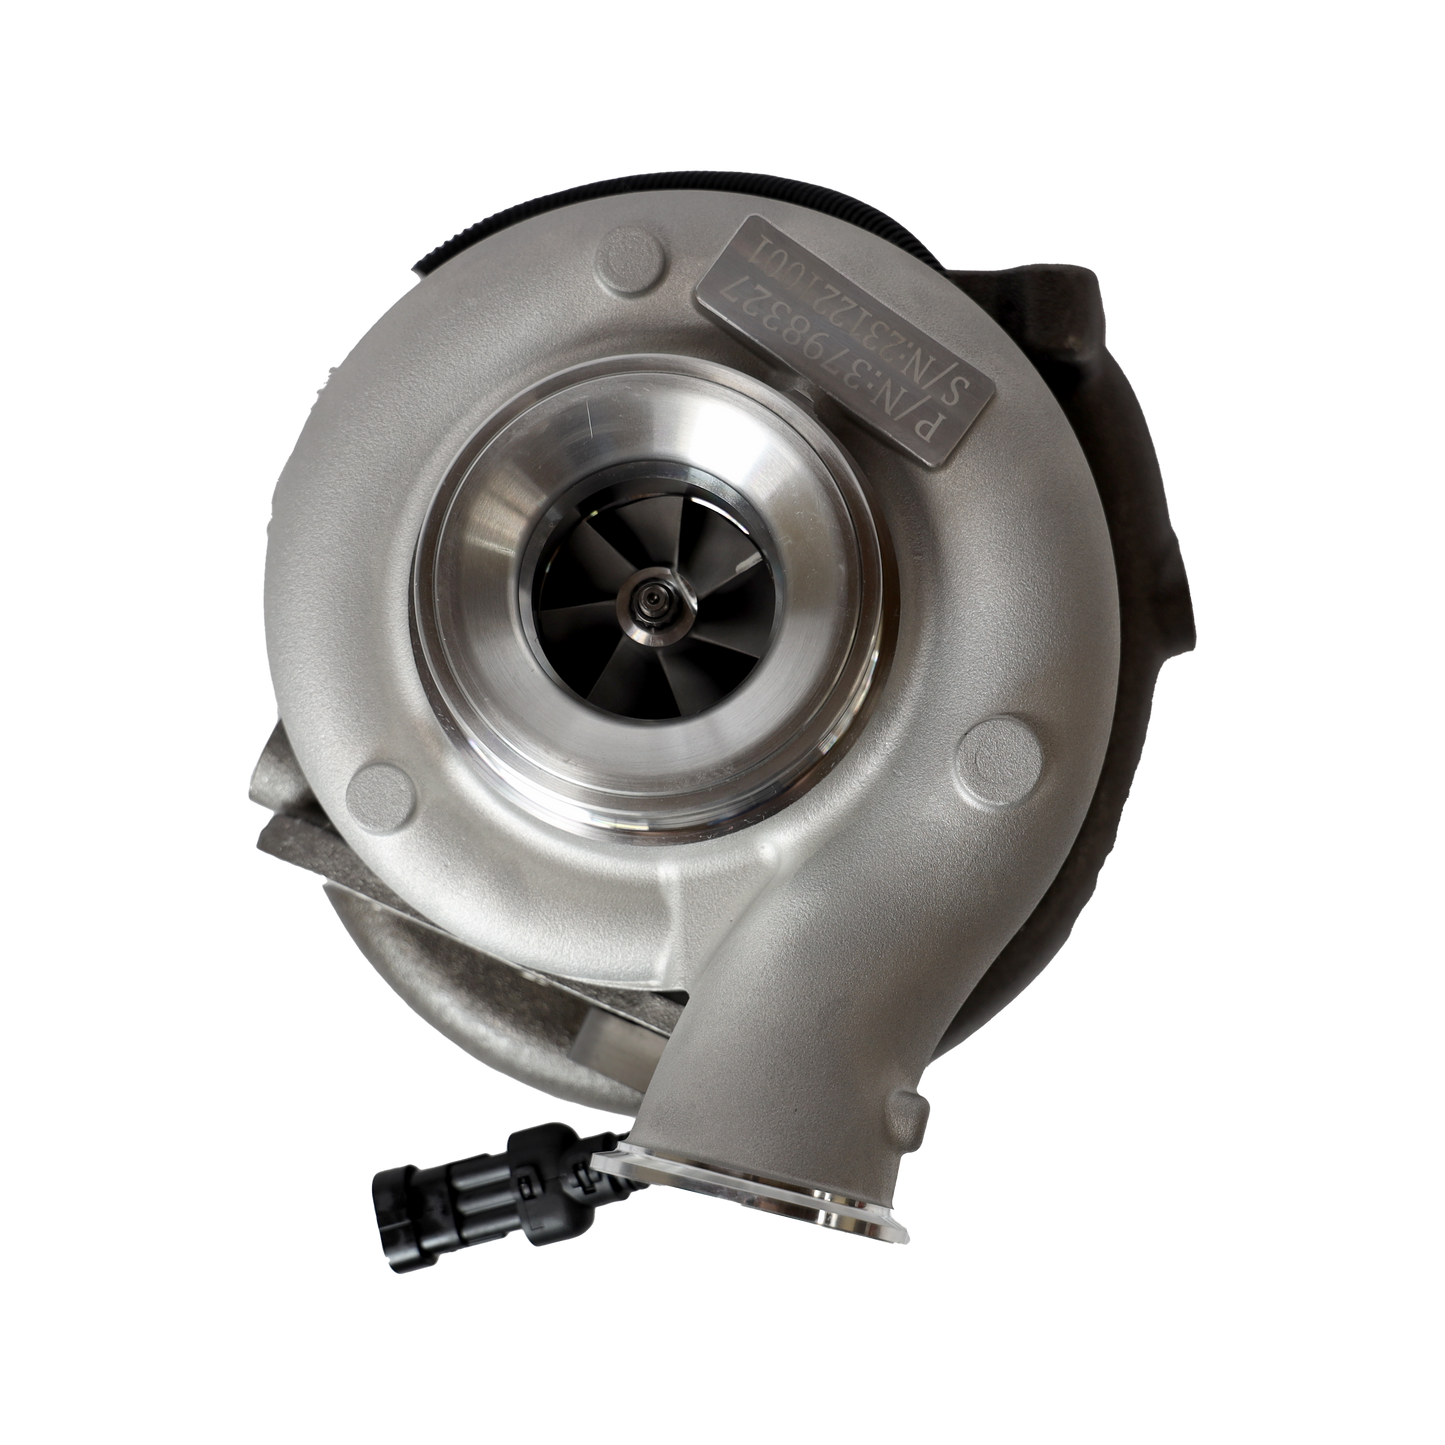 3798327 Cummins 6.7L ISB HE351VE Turbocharger with Actuator